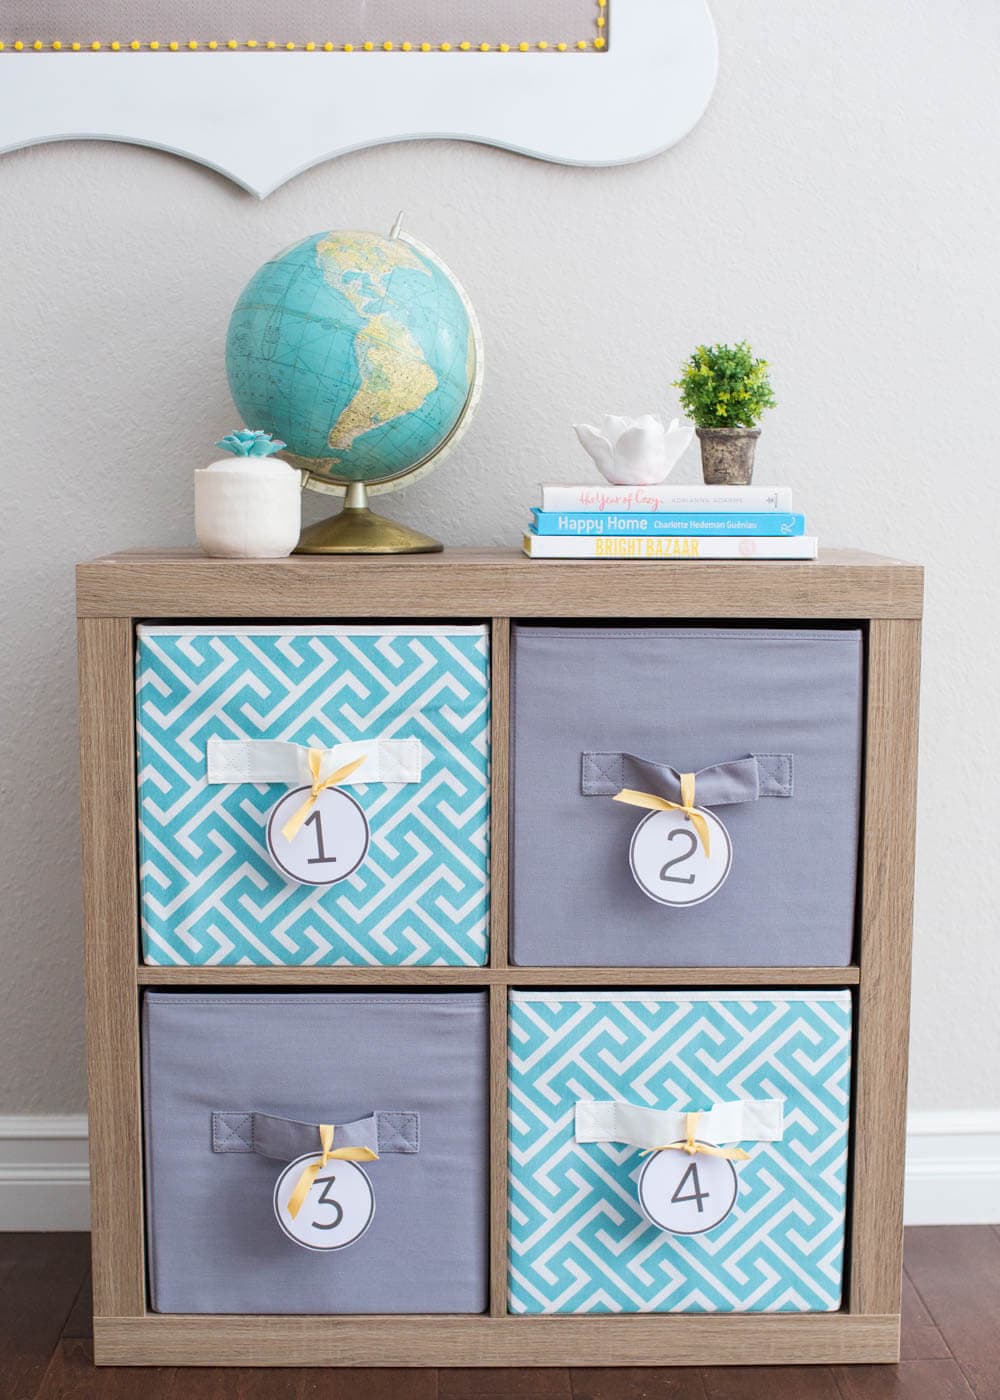 Free Printable Alphabet Circles - perfect for organizing your totes and boxes at home!